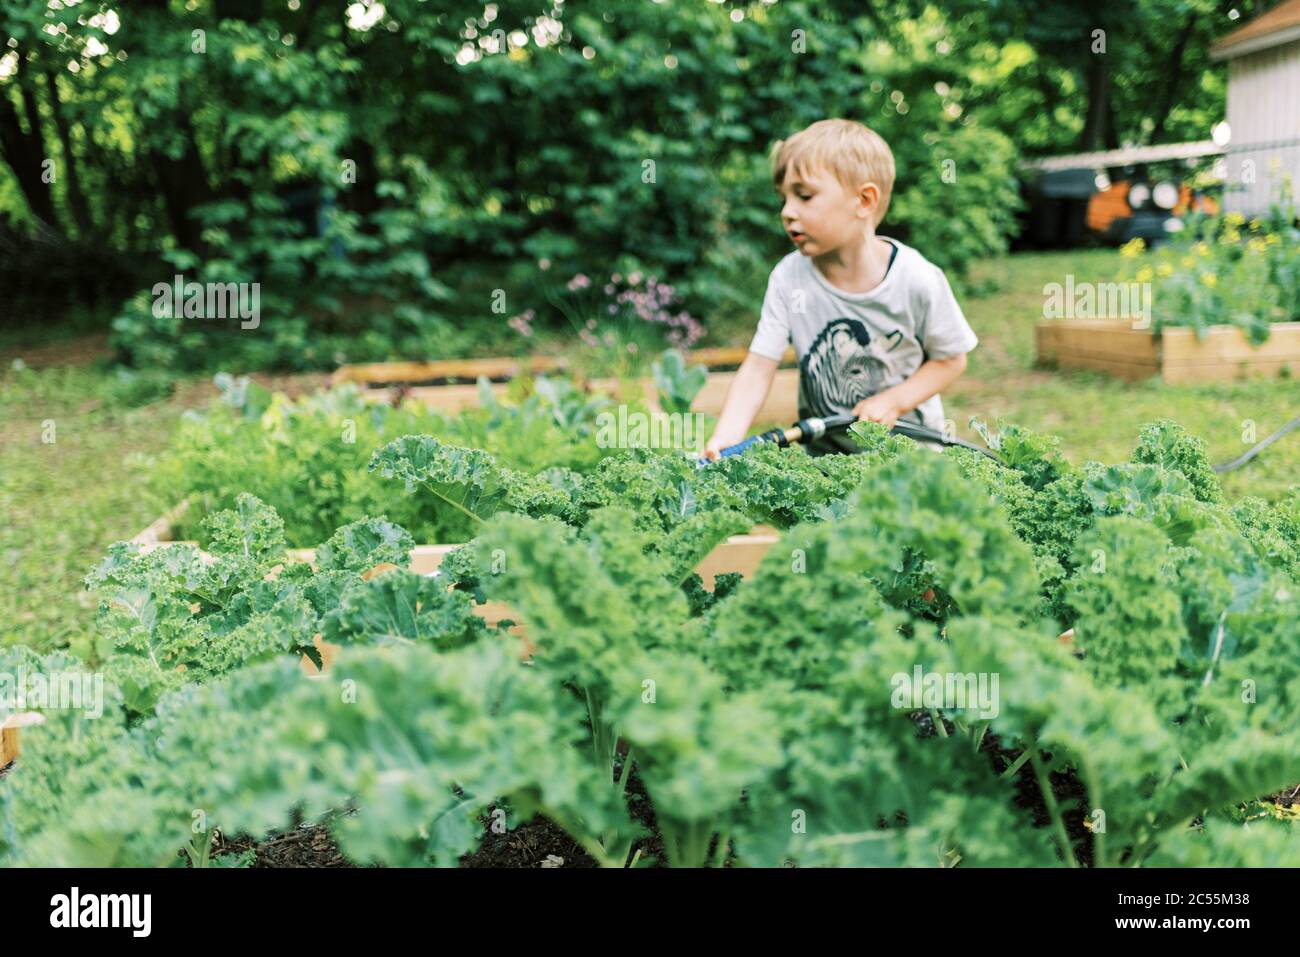 A little boy doing his chore of watering the vegetable gardens Stock Photo